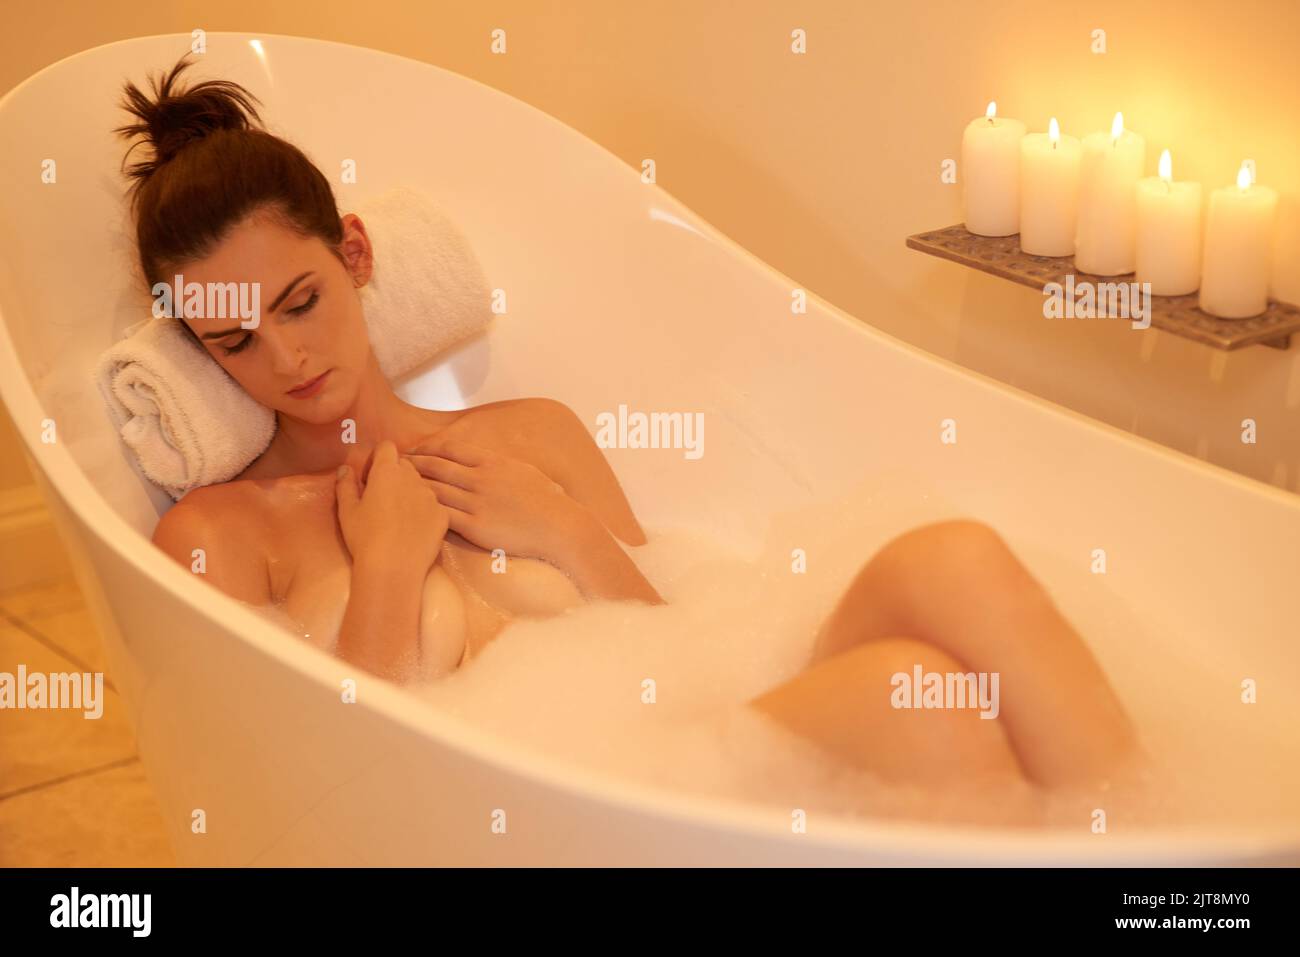 Nothing bothers her in the bathtub. High angle shot of an attractive young woman taking a bubble bath. Stock Photo